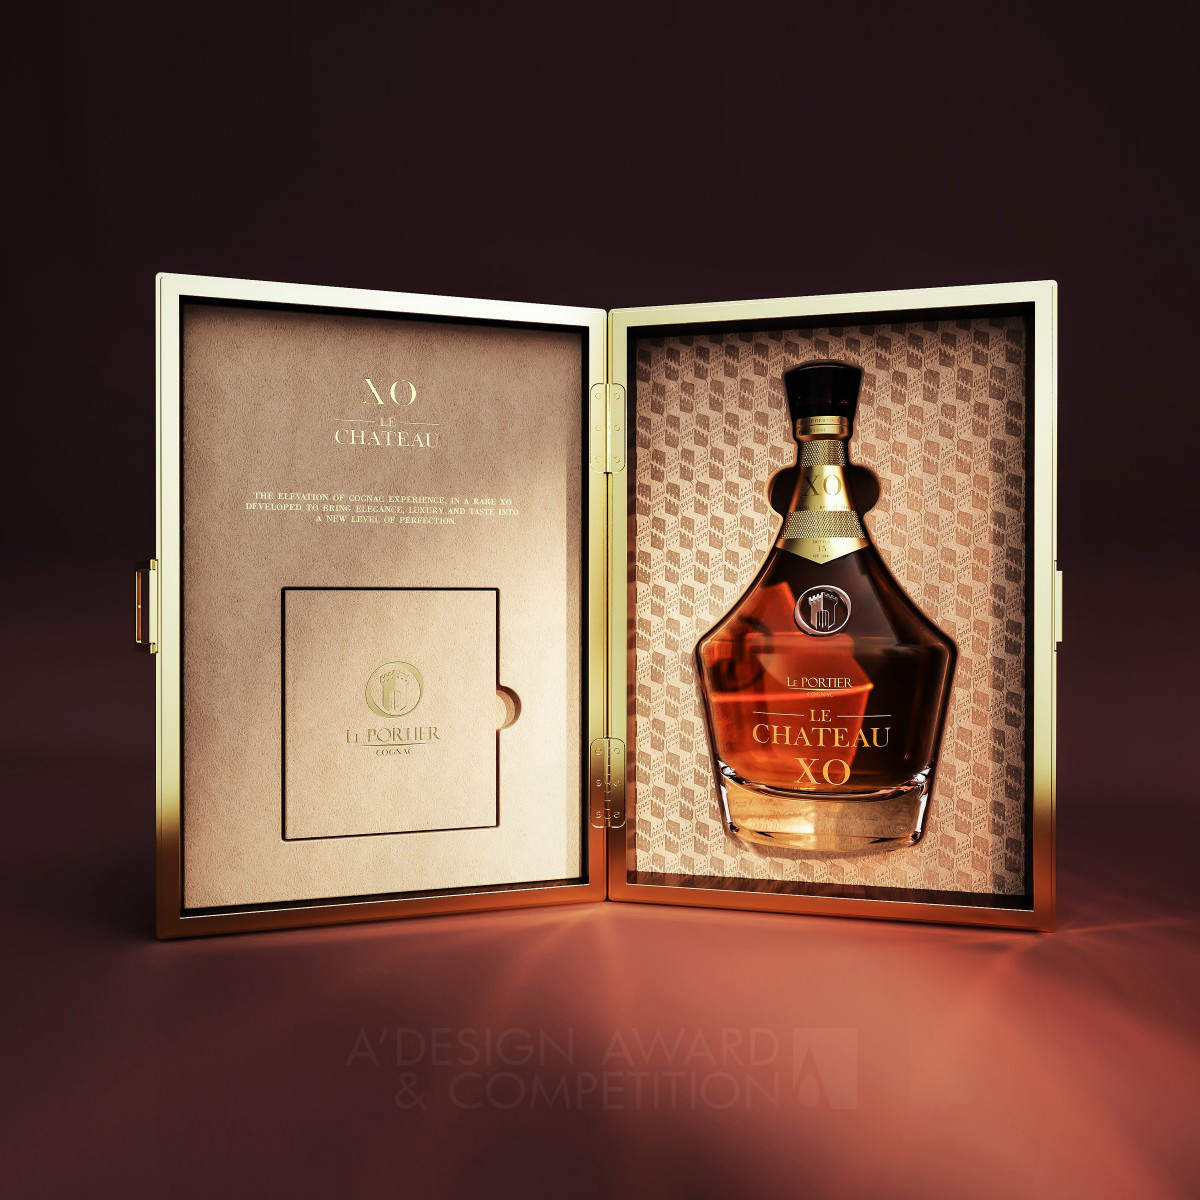 Le Chateau XO Luxury Cognac by Tiago Russo and Katia Martins Silver Packaging Design Award Winner 2024 